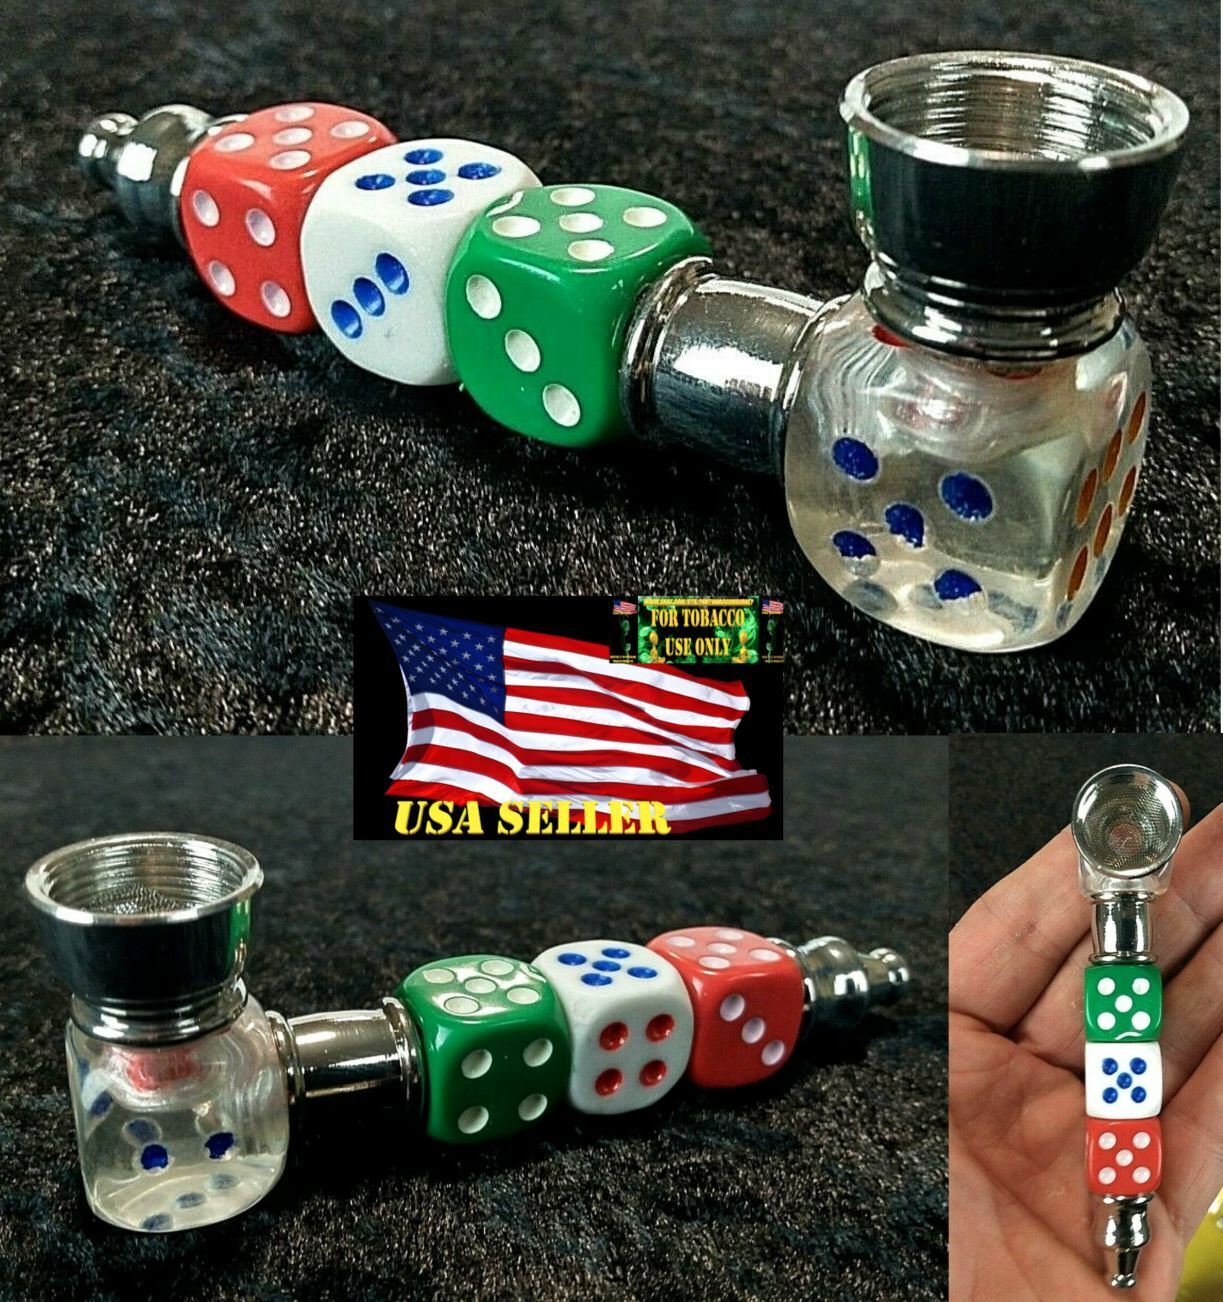 NEW 4 inch Long Dice Style Metal Tobacco Smoking Pipe & Silver Screens